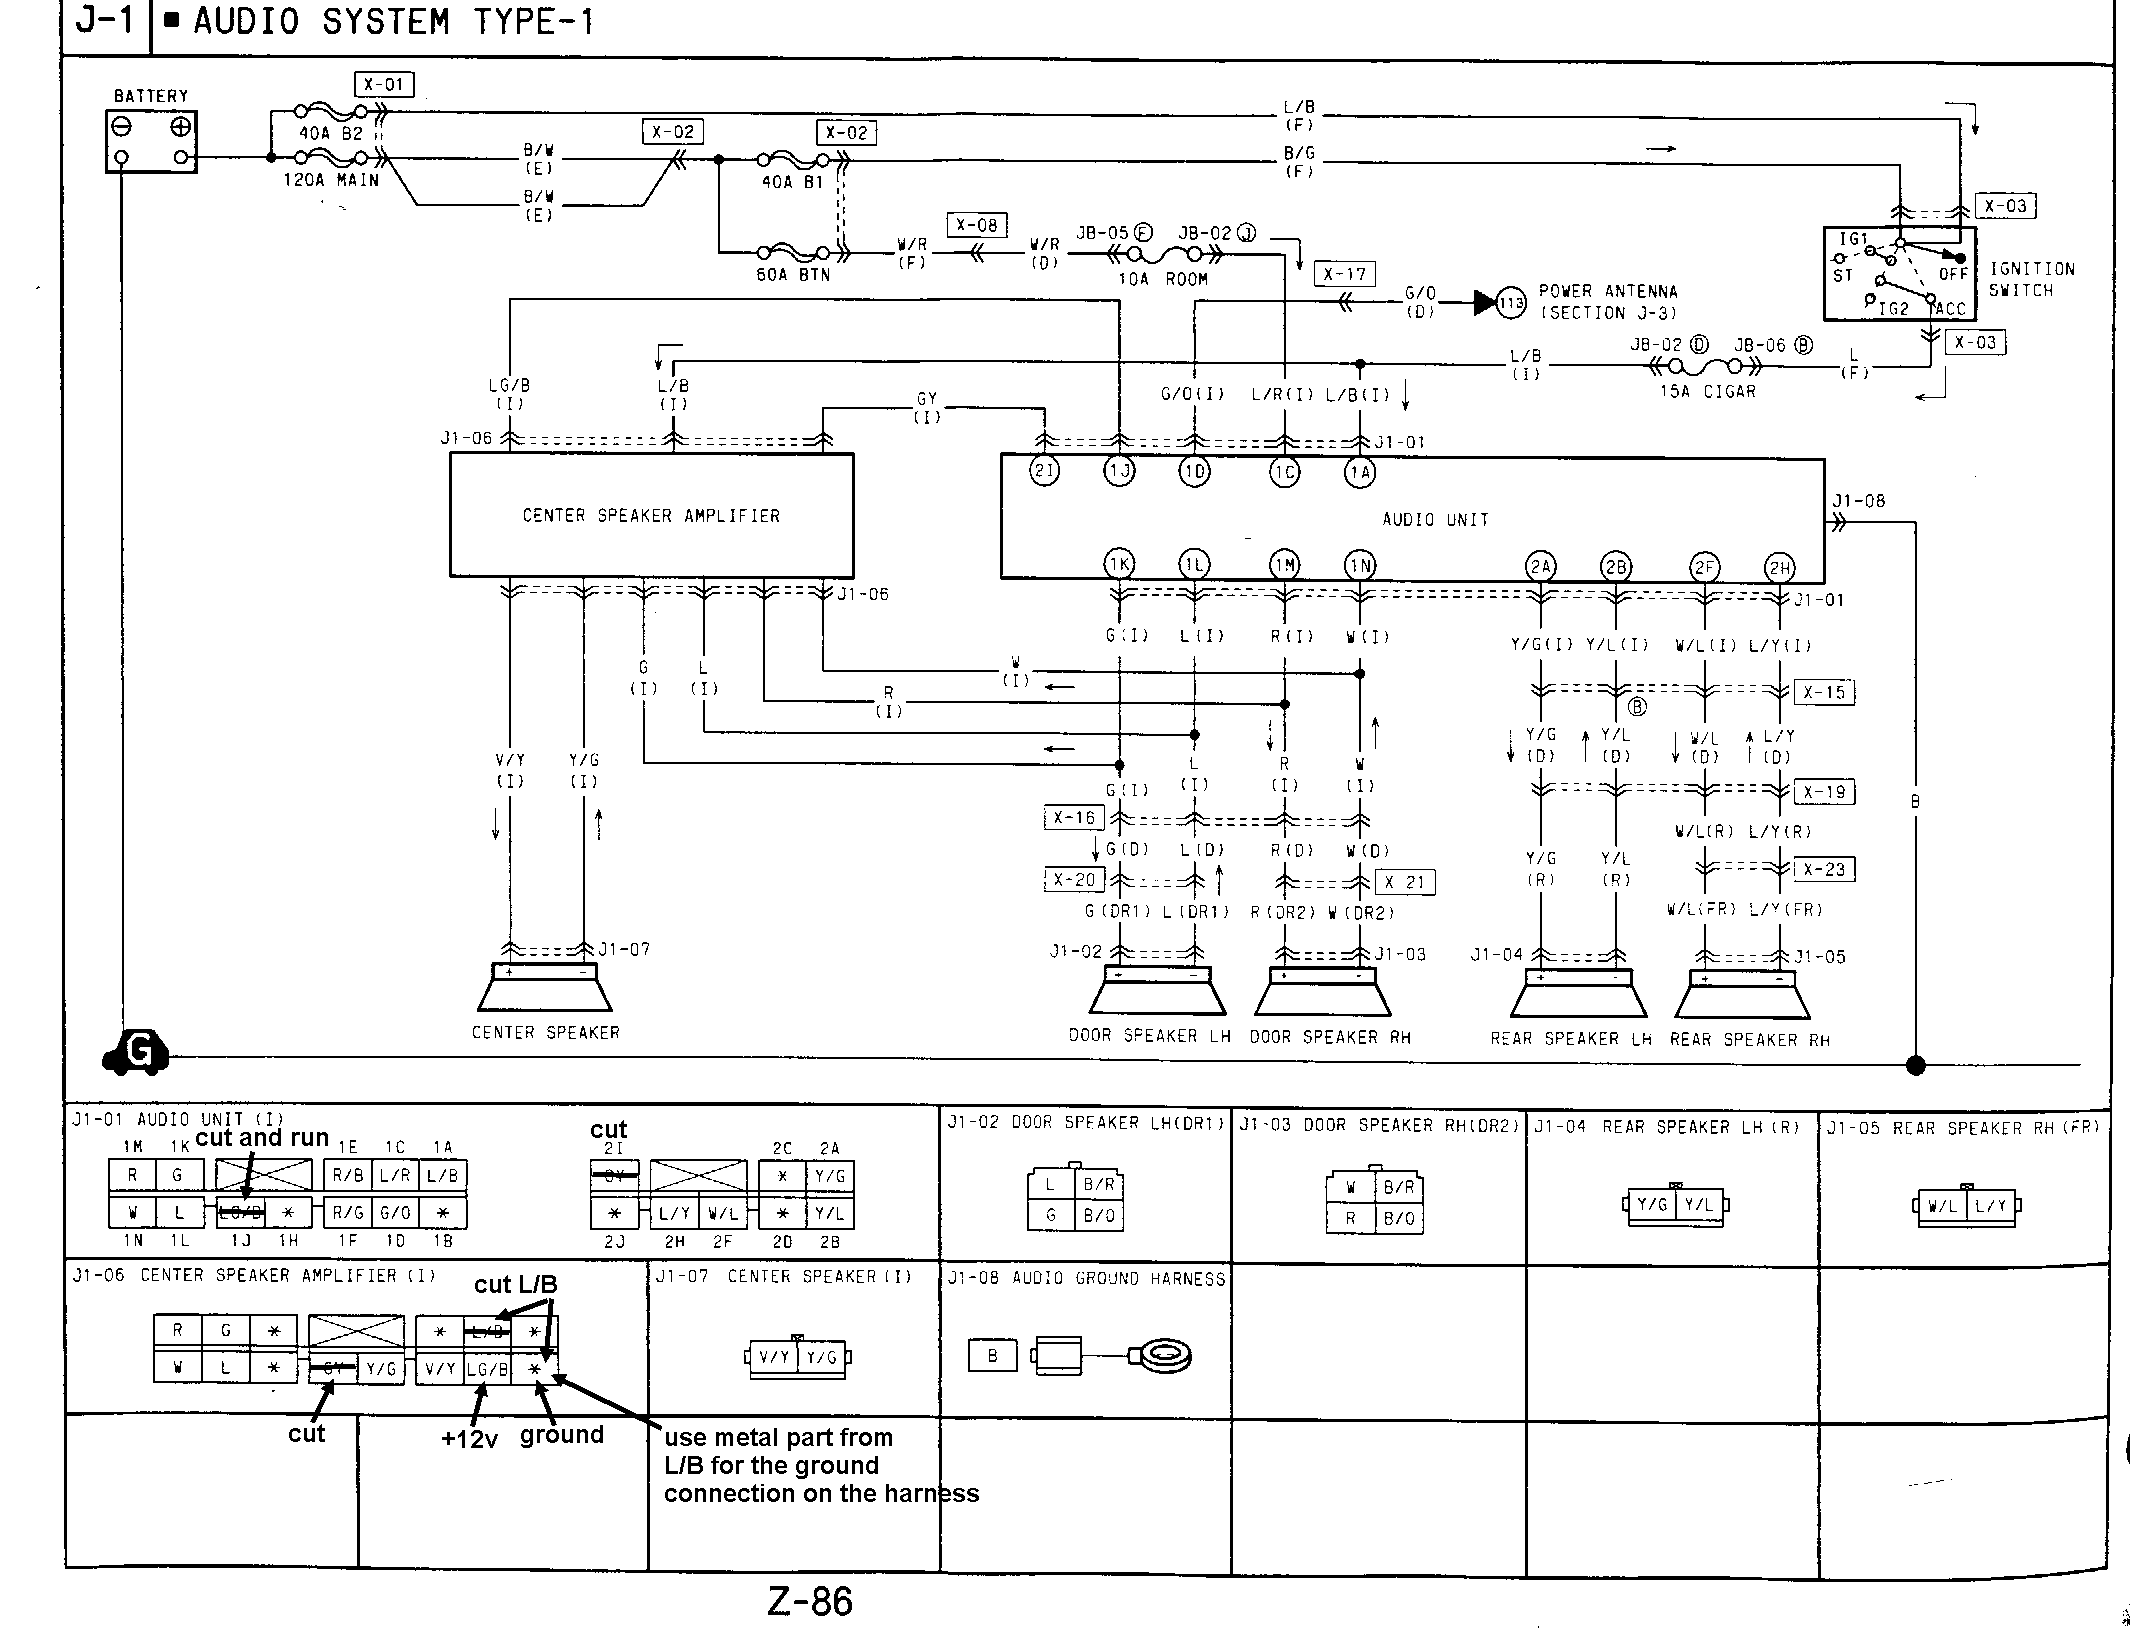 Wiring Schematic for Base Model Stereo